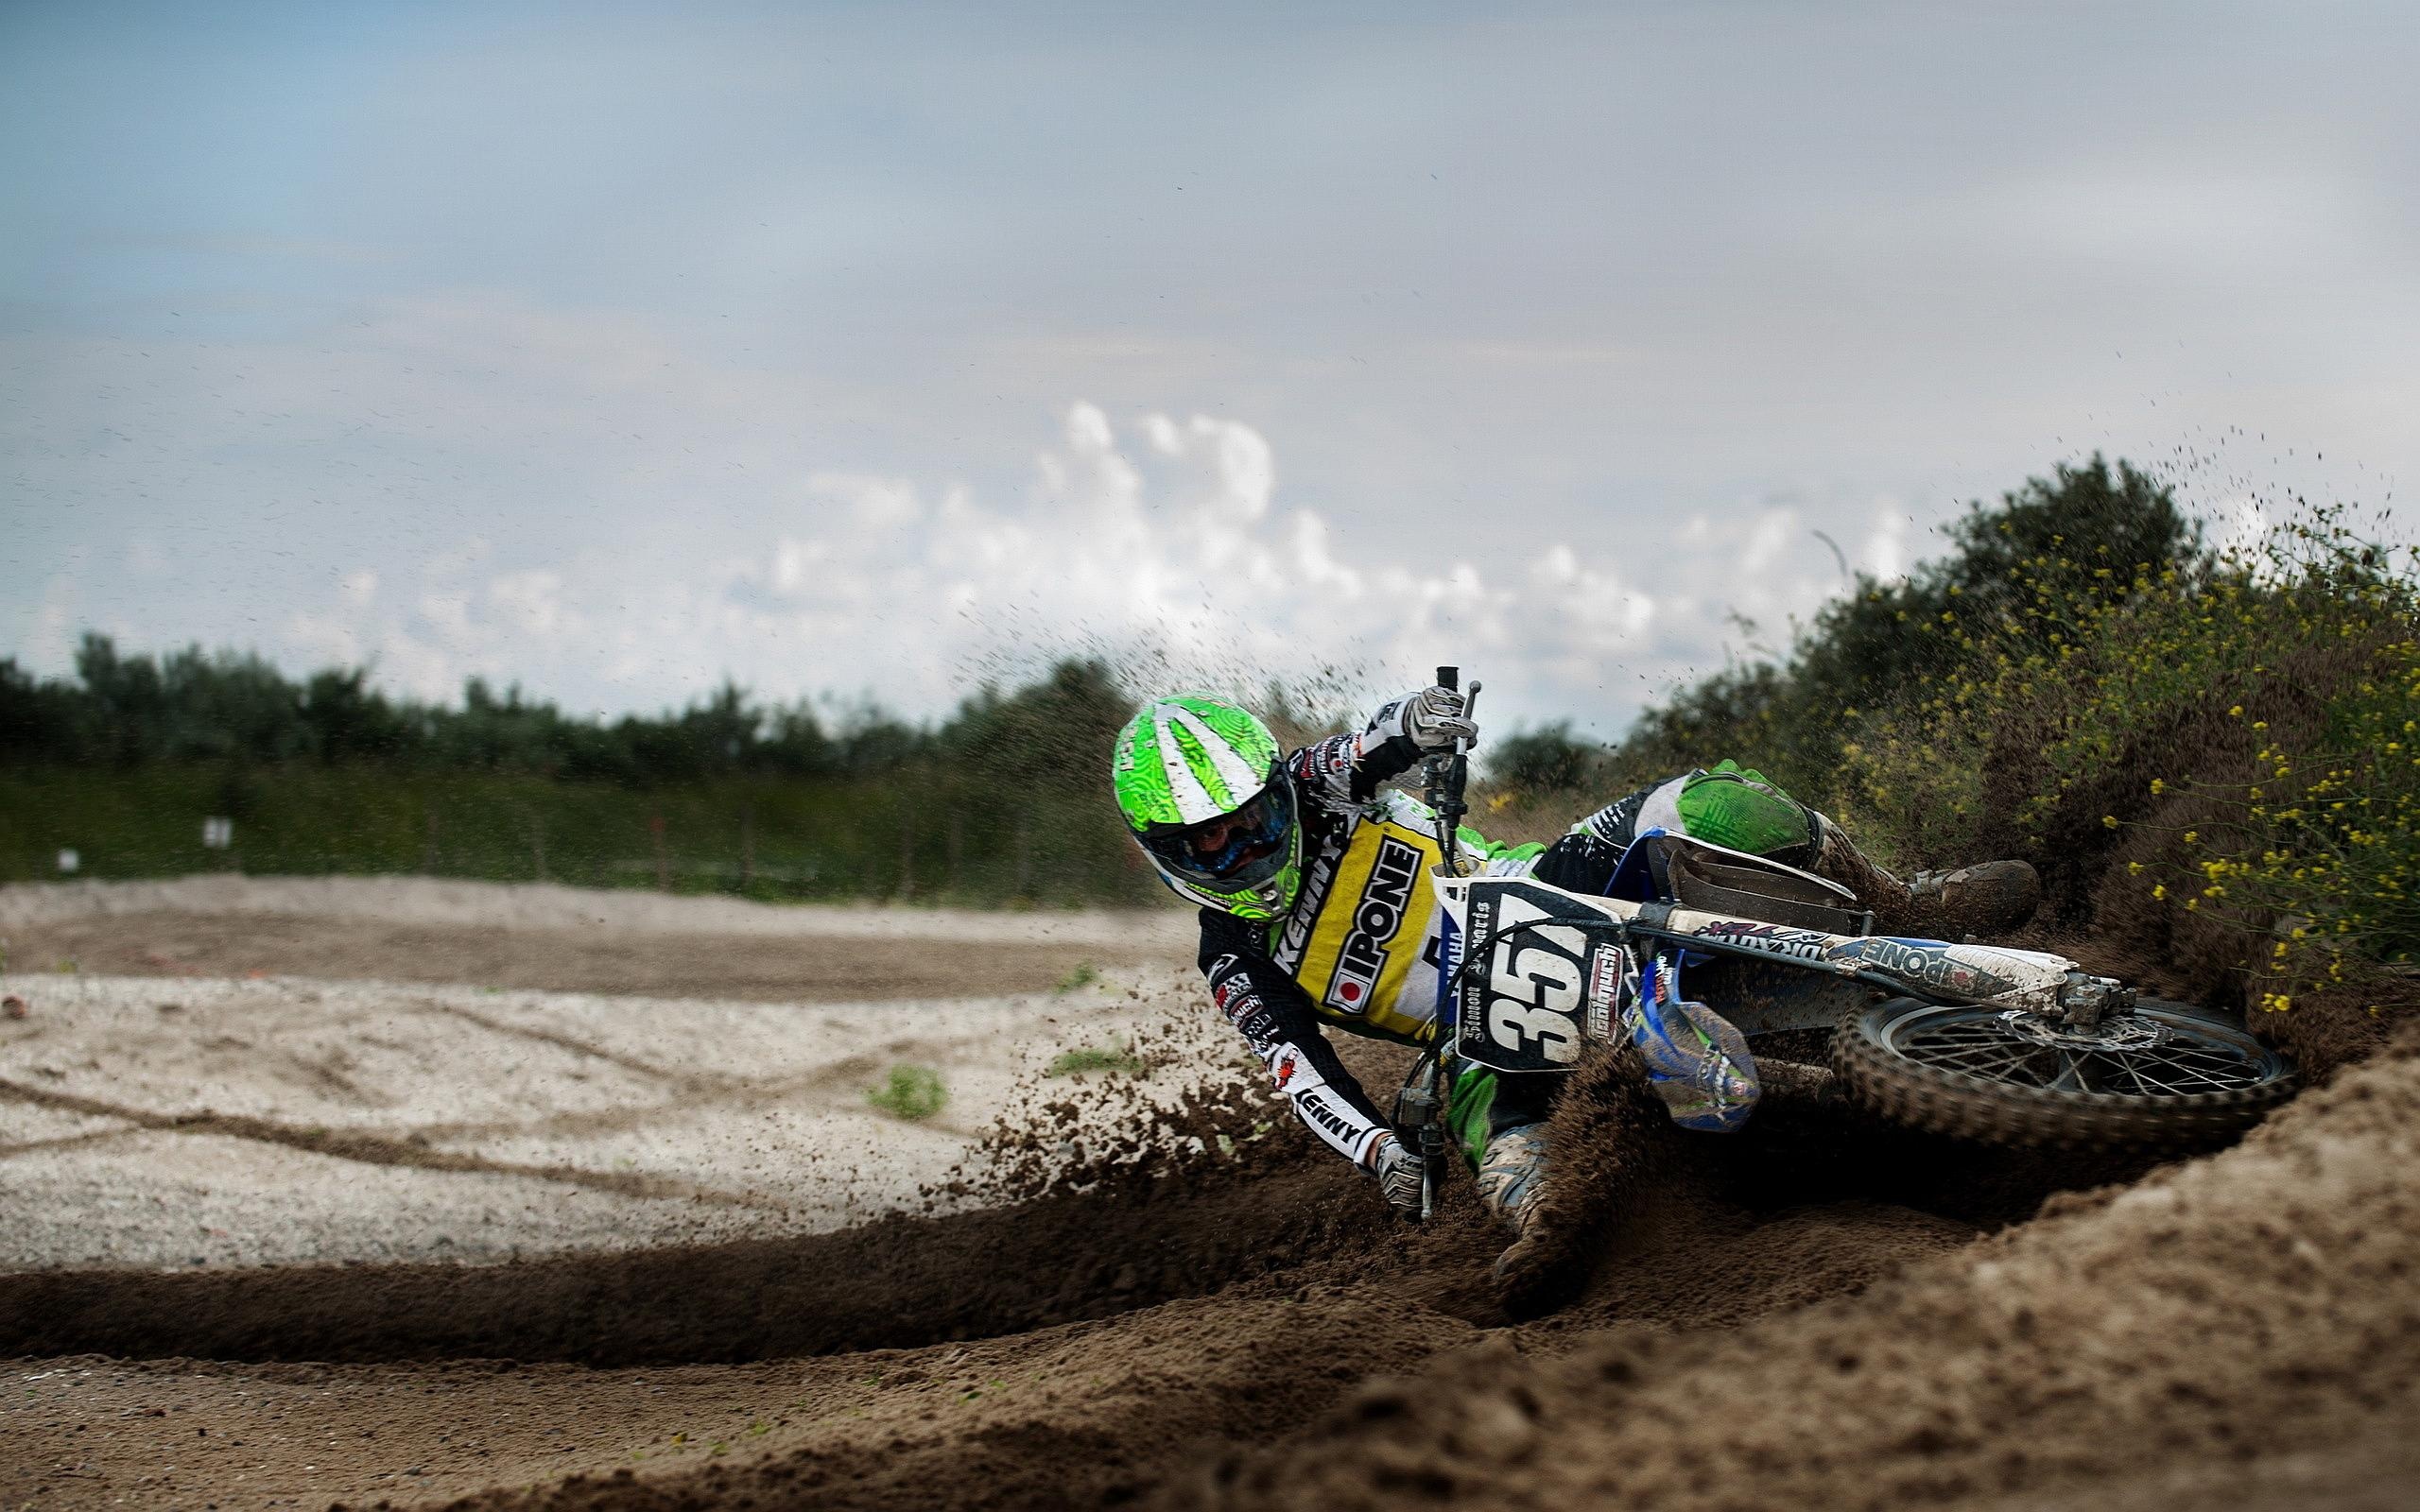 Motocross: The motorcycle racer drove off the track, Bad cornering, Moto Sports. 2560x1600 HD Background.